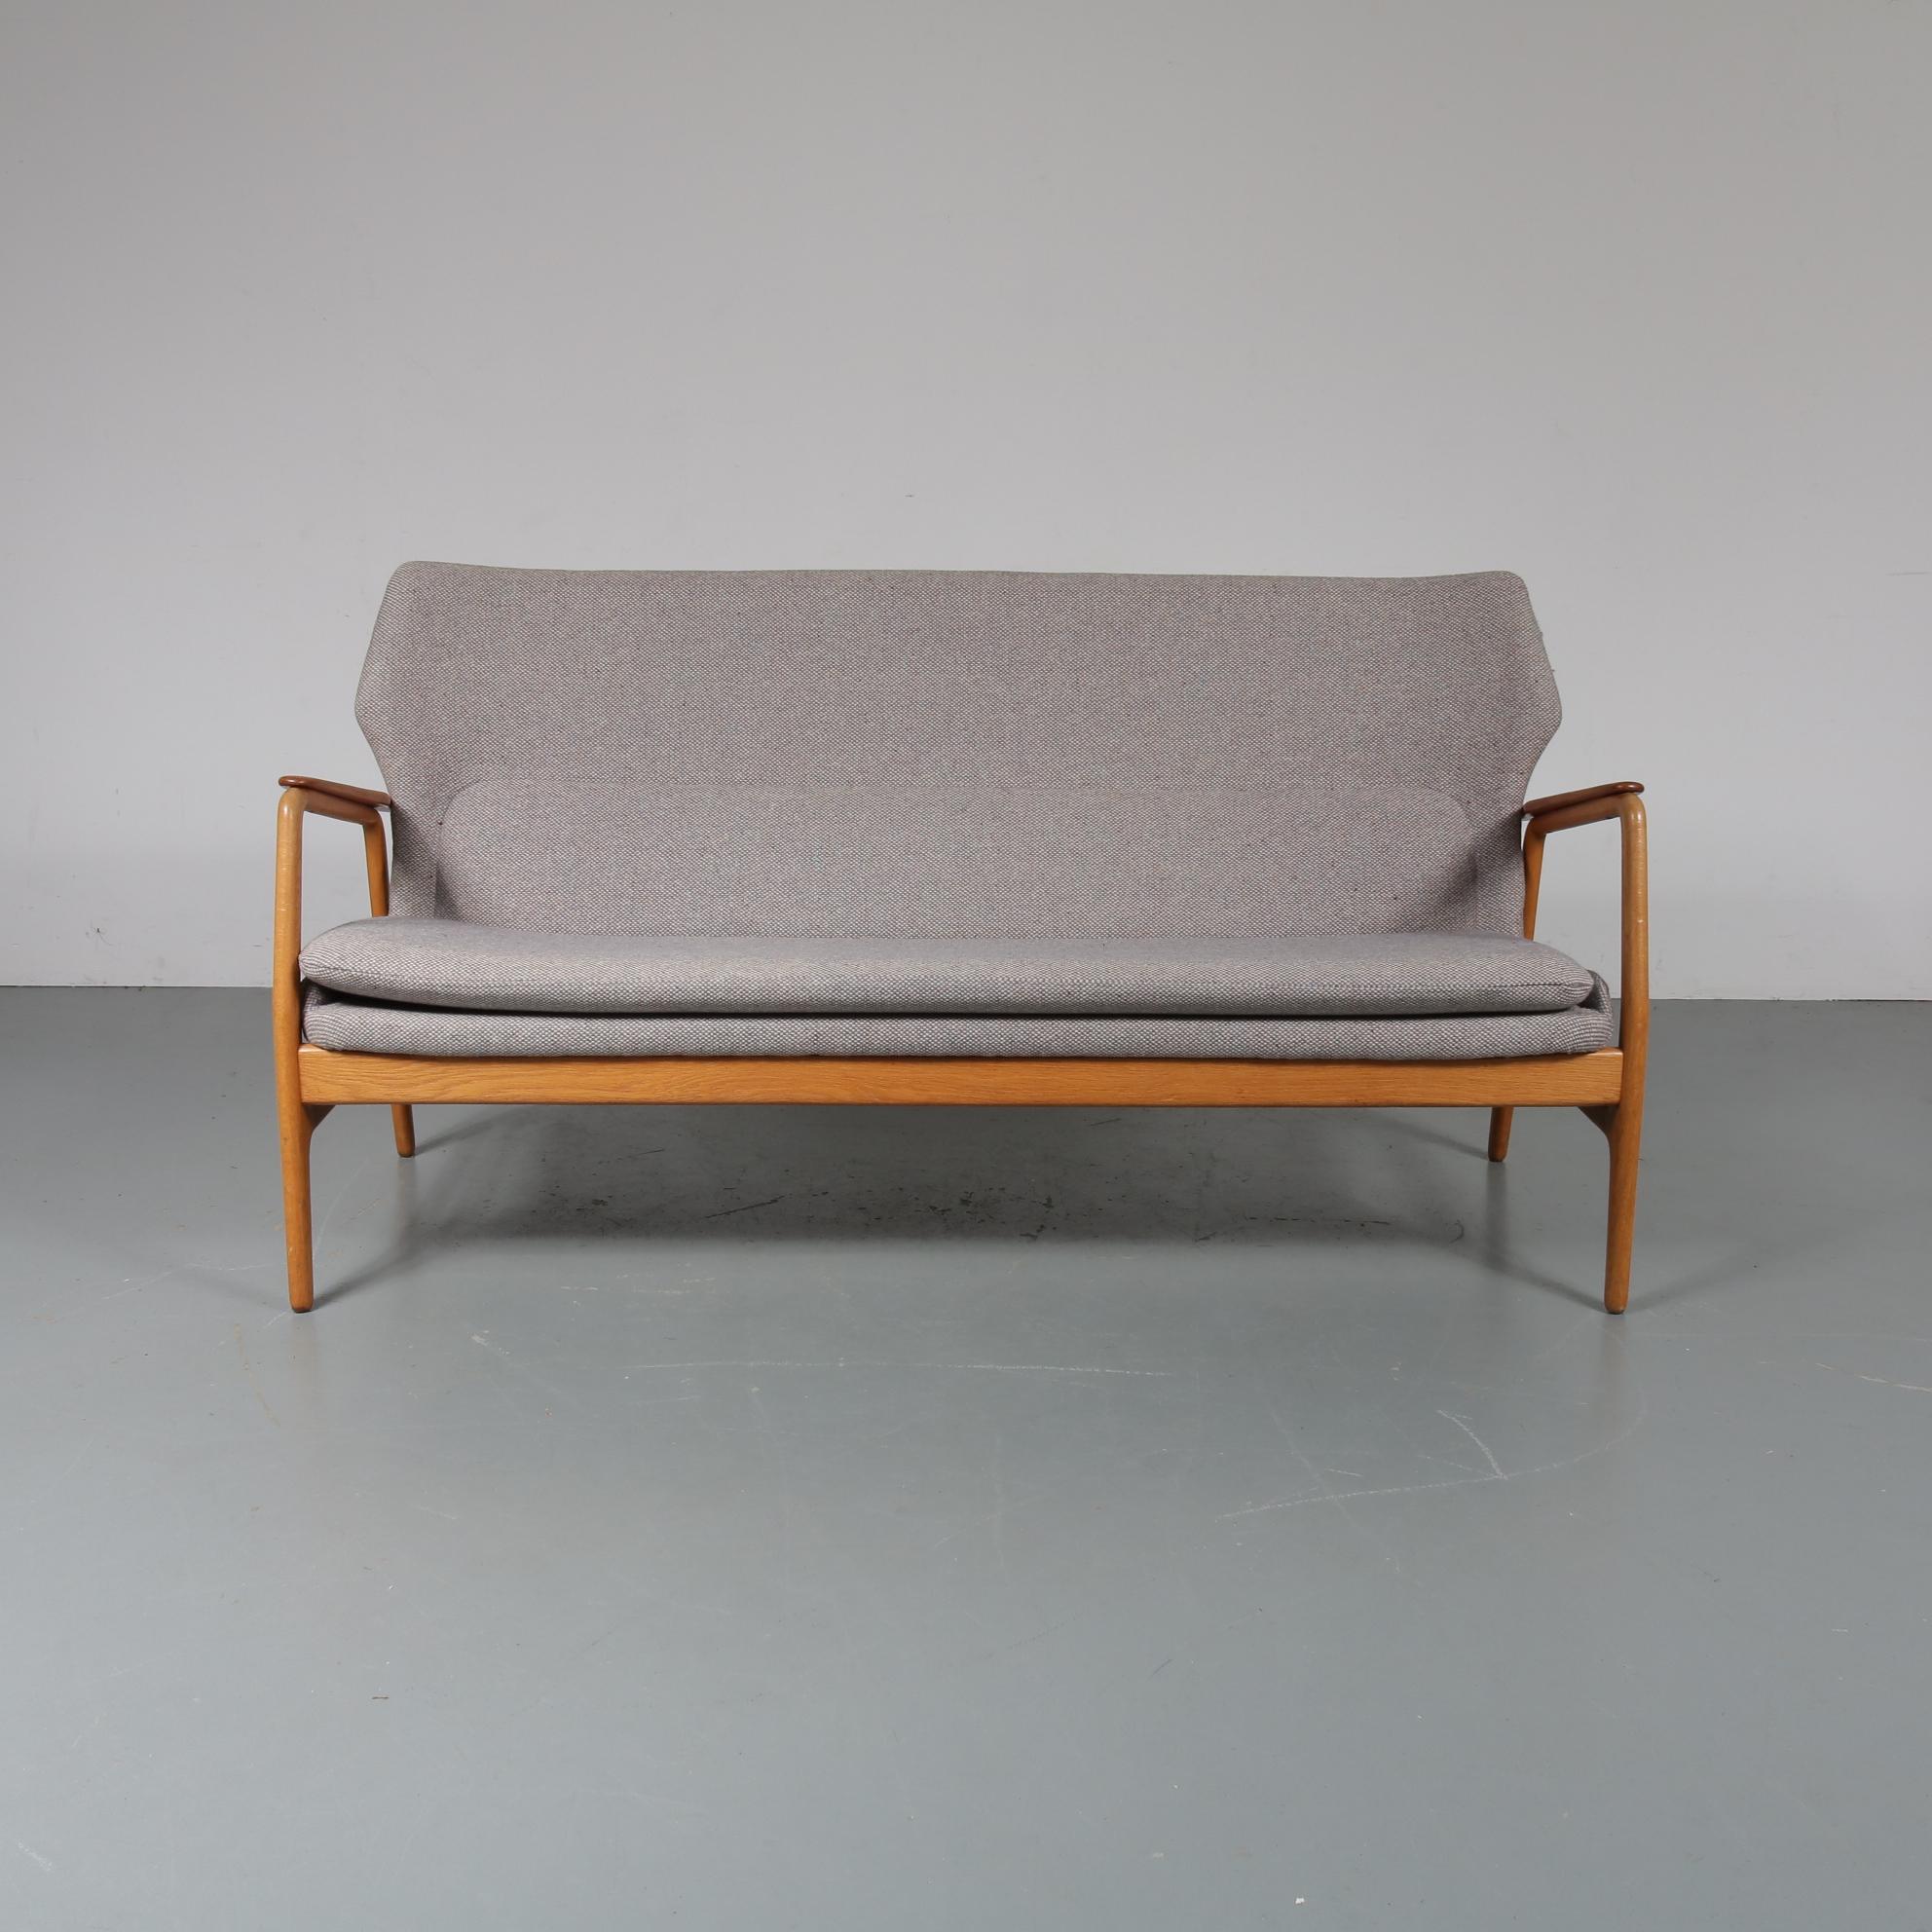 A stunning Bovenkamp sofa designed by Aksel Bender Madsen and manufactured by Bovenkamp in the Netherlands, circa 1950.

The sofa is upholstered in the finest quality beige fabric with a beautiful combination of oakwood base and teak armrests.